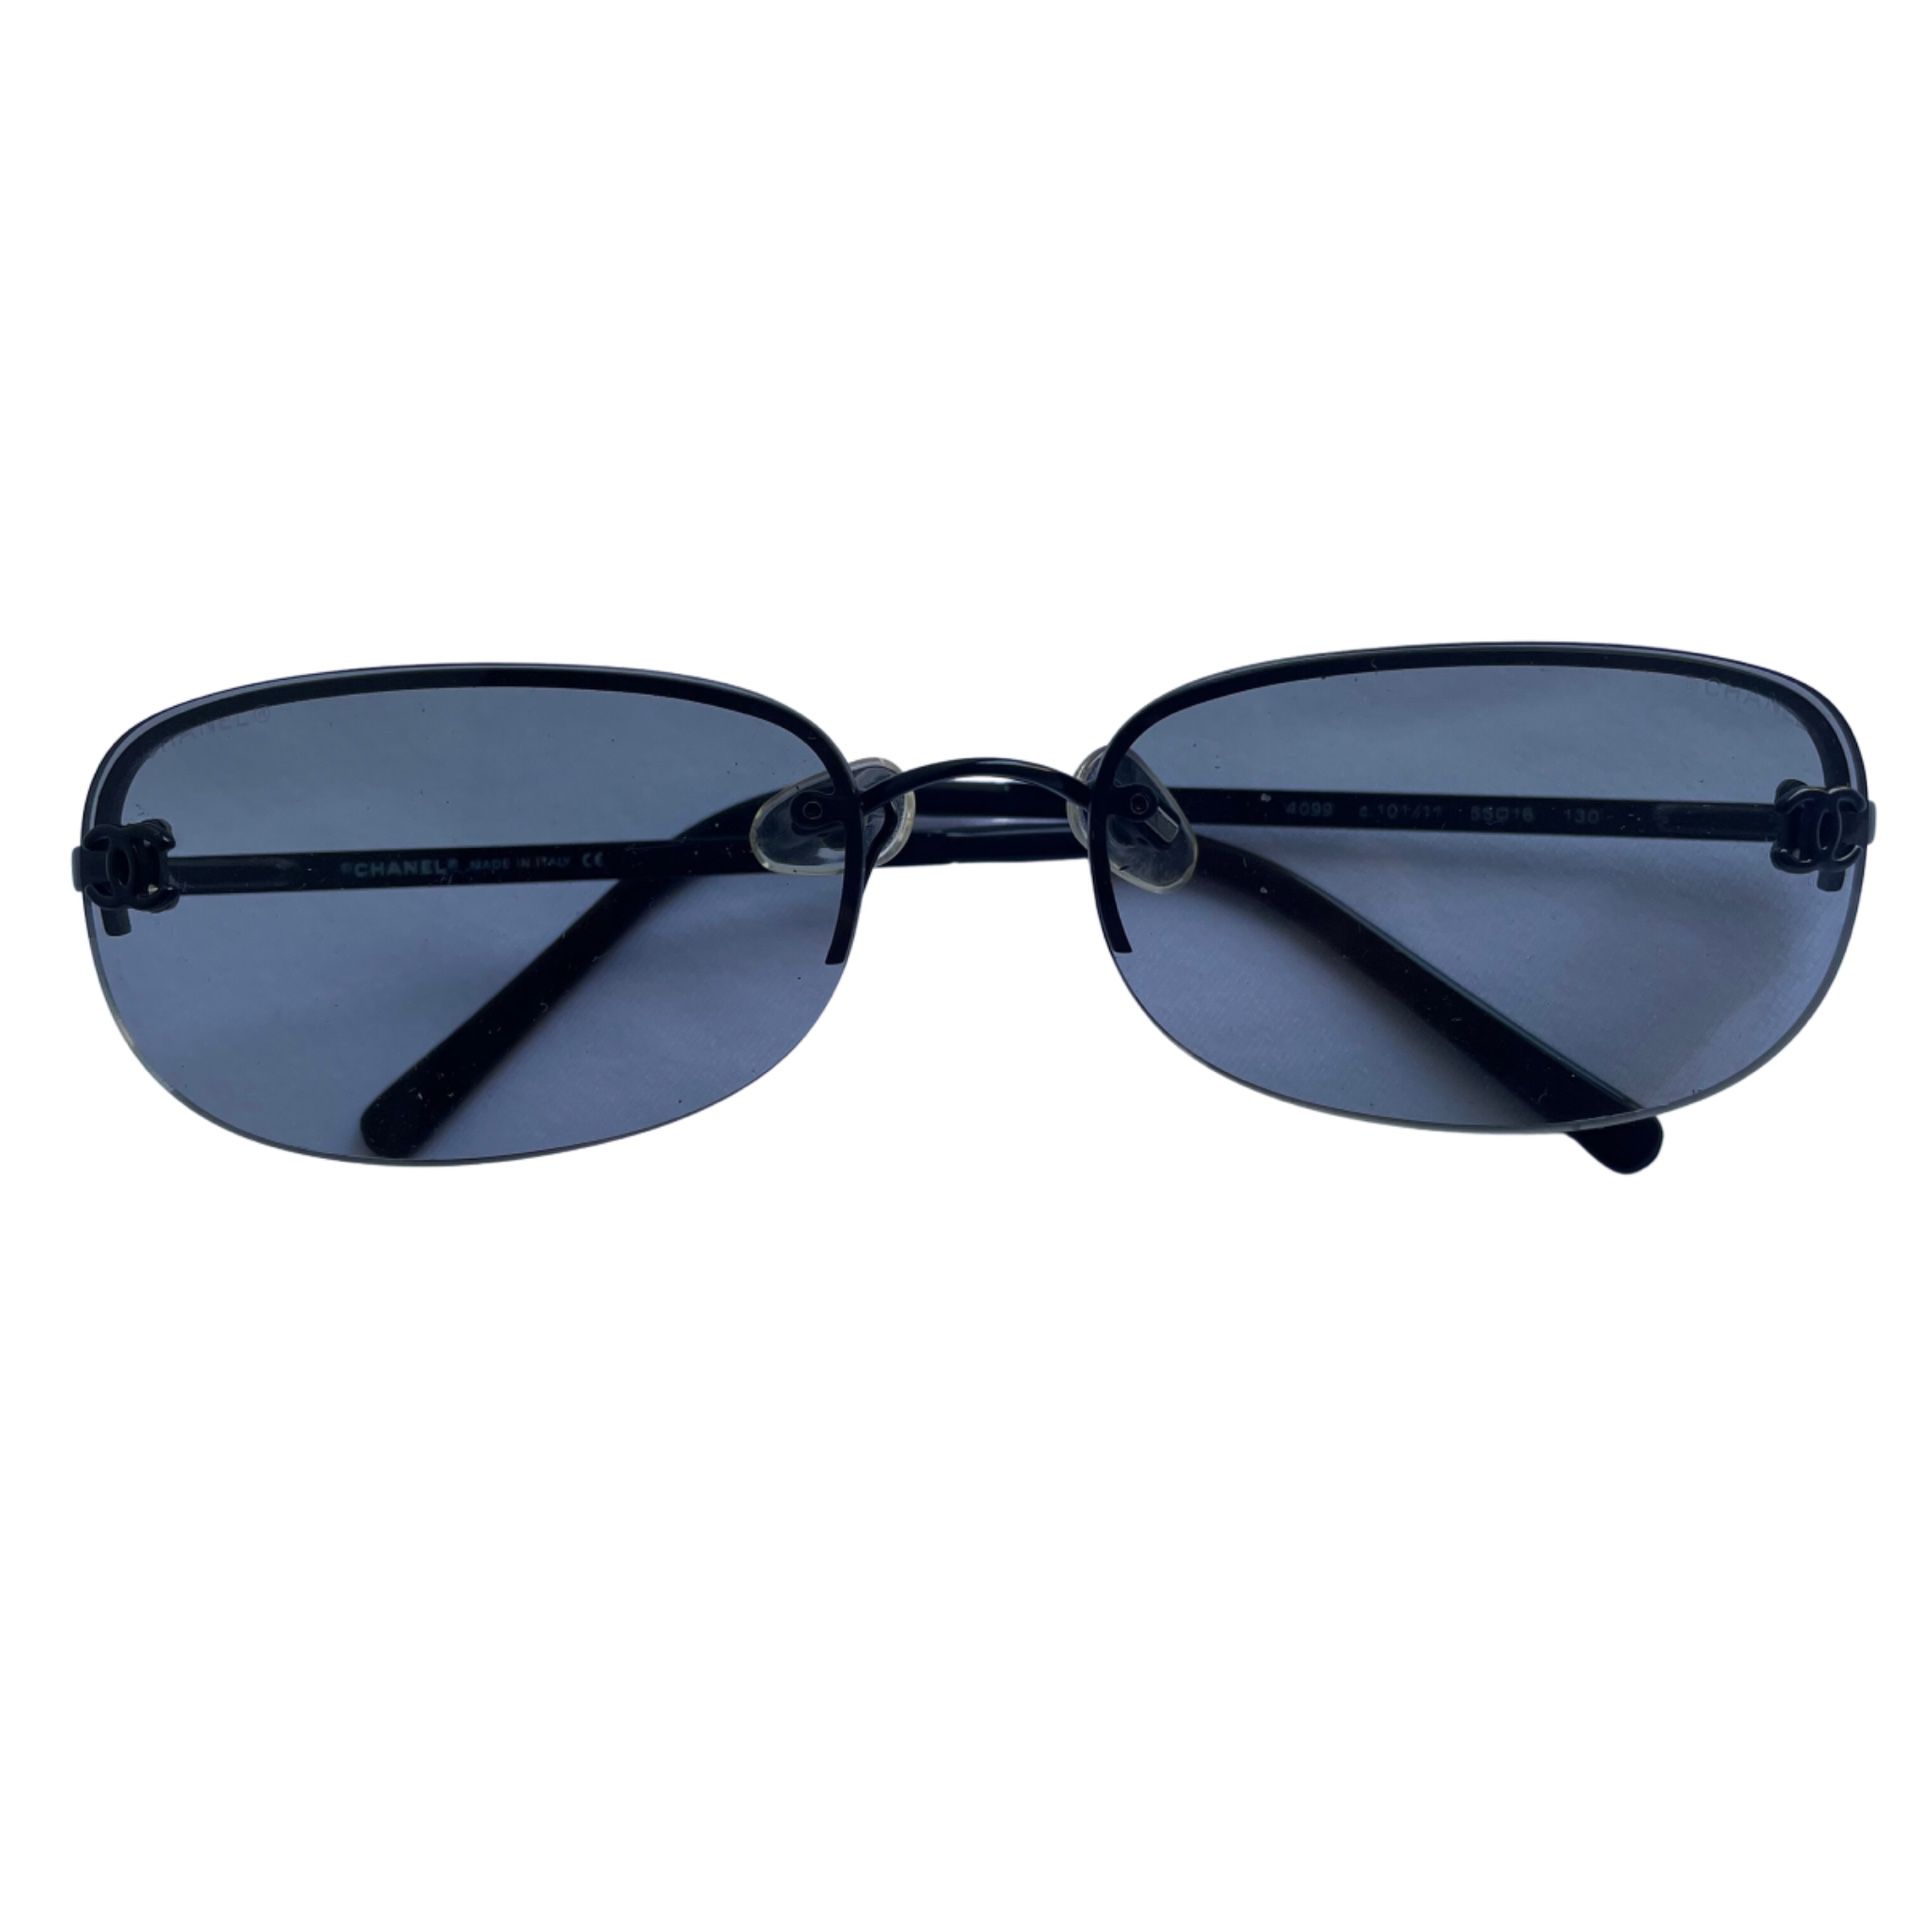 Chanel Sunglasses with Blue and Black Frames